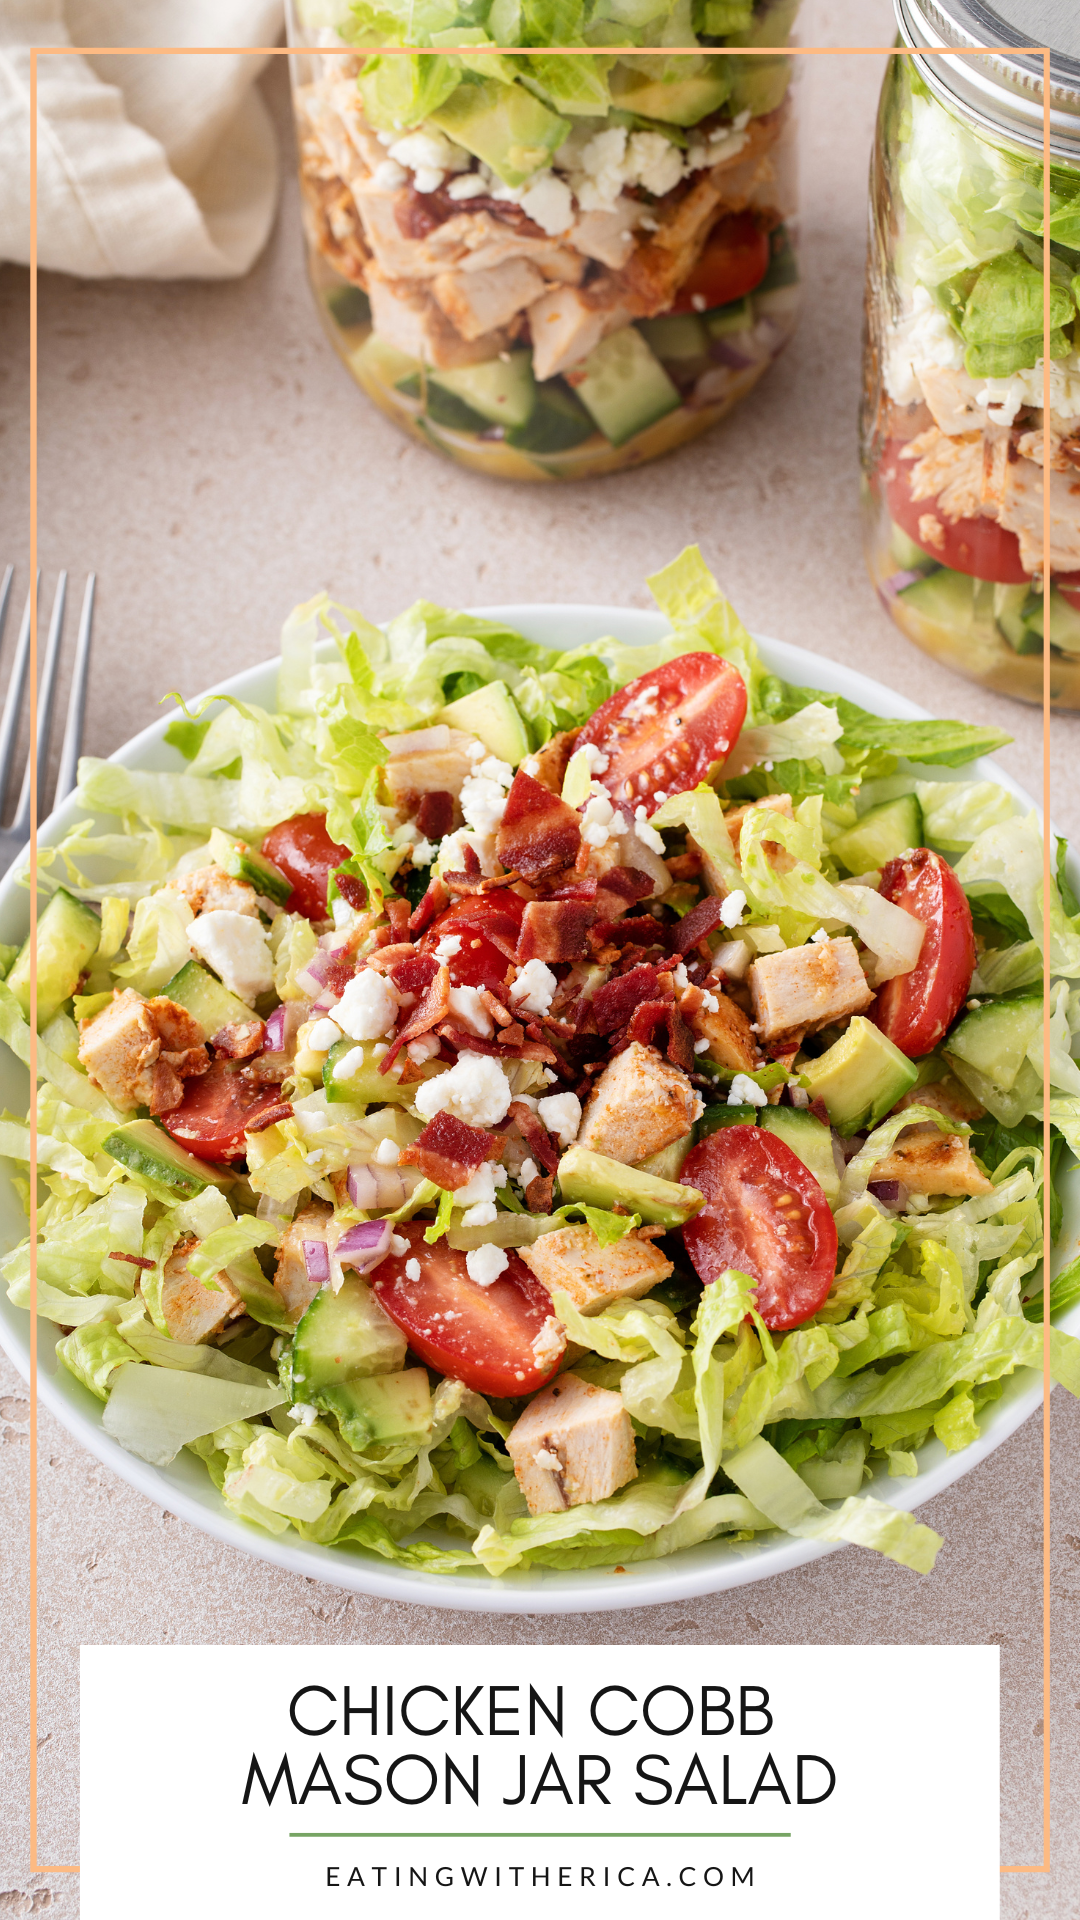 Need the perfect grab and go lunch option? Click HERE for the perfect Chicken Cobb Mason Jar Salad!